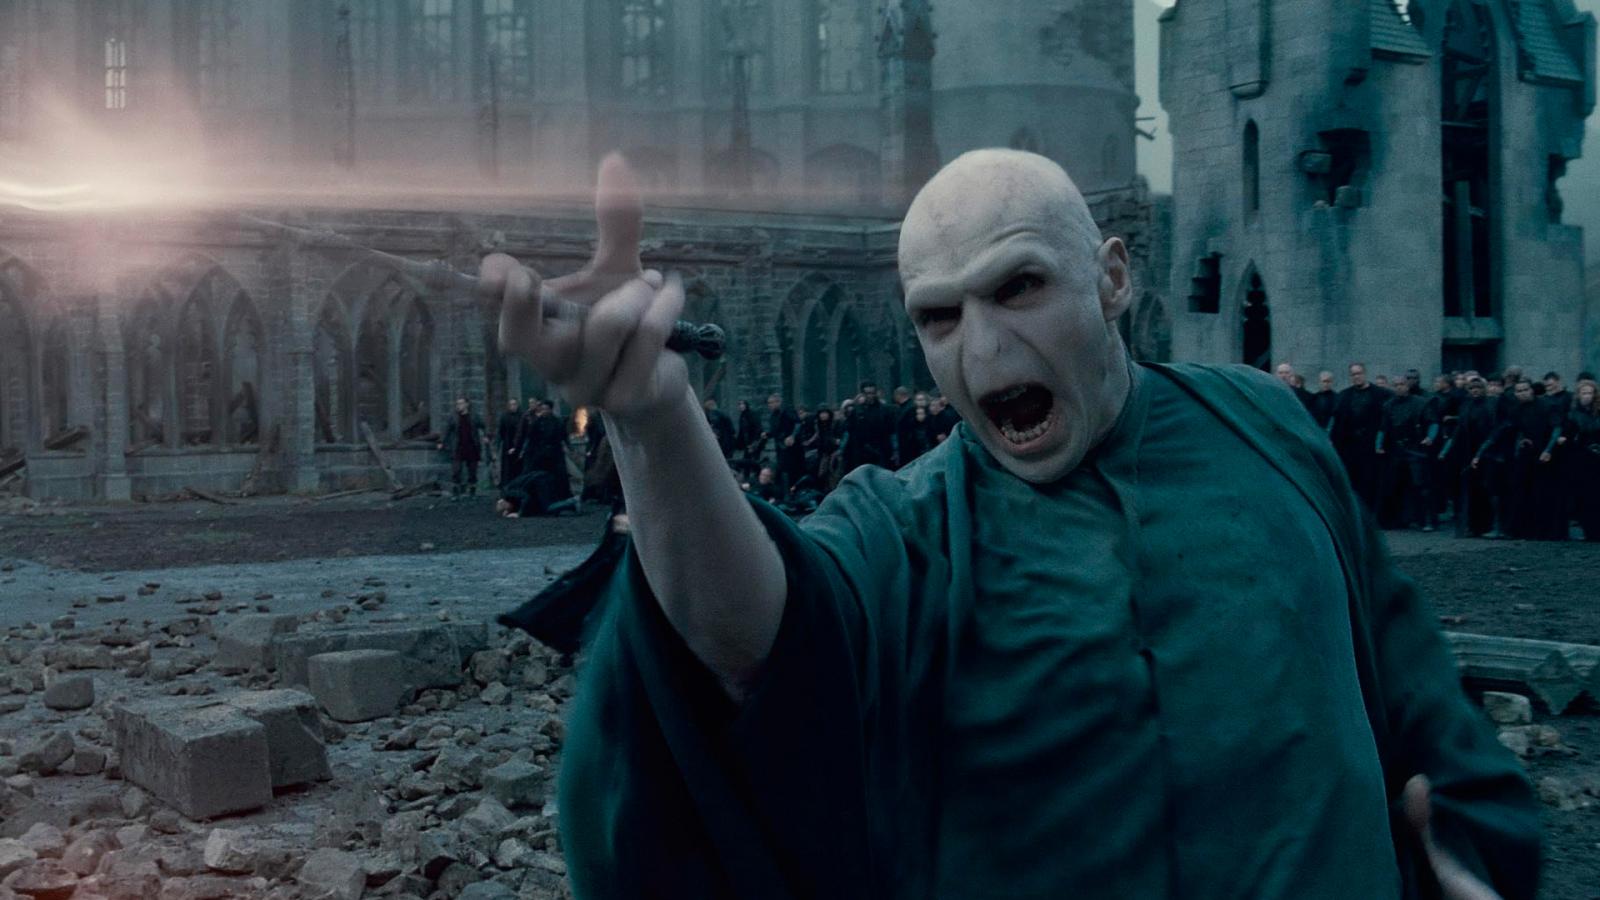 Why Didn't Dumbledore Try to Use Voldemort's Biggest Weakness: His Memory Loss? - image 2